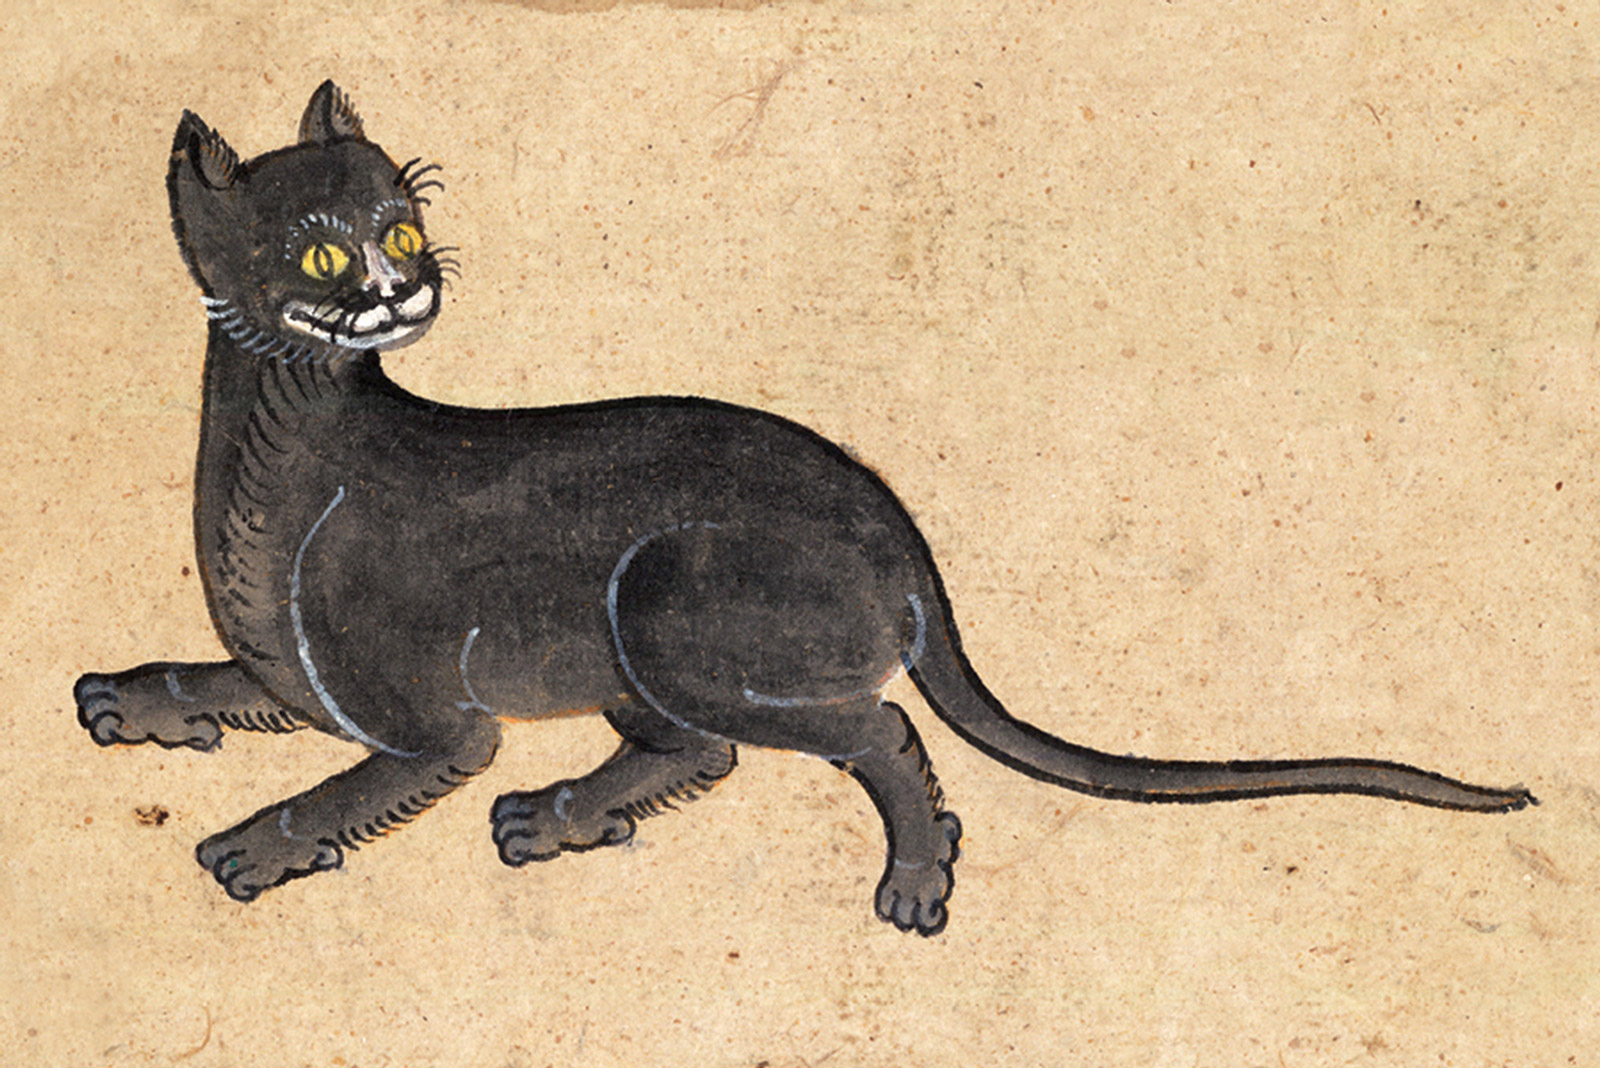 An illustration of a Singha Sep (Lion) cat from a mid-nineteenth-century manuscript titled “Tamra Maew.” The accompanying caption reads: “The Lion is a black-bodied breed.
White around the mouth, around
The neck’s conch-shell mane, and on nose tip.
Gamboge eyes, drops of water fading in light.”